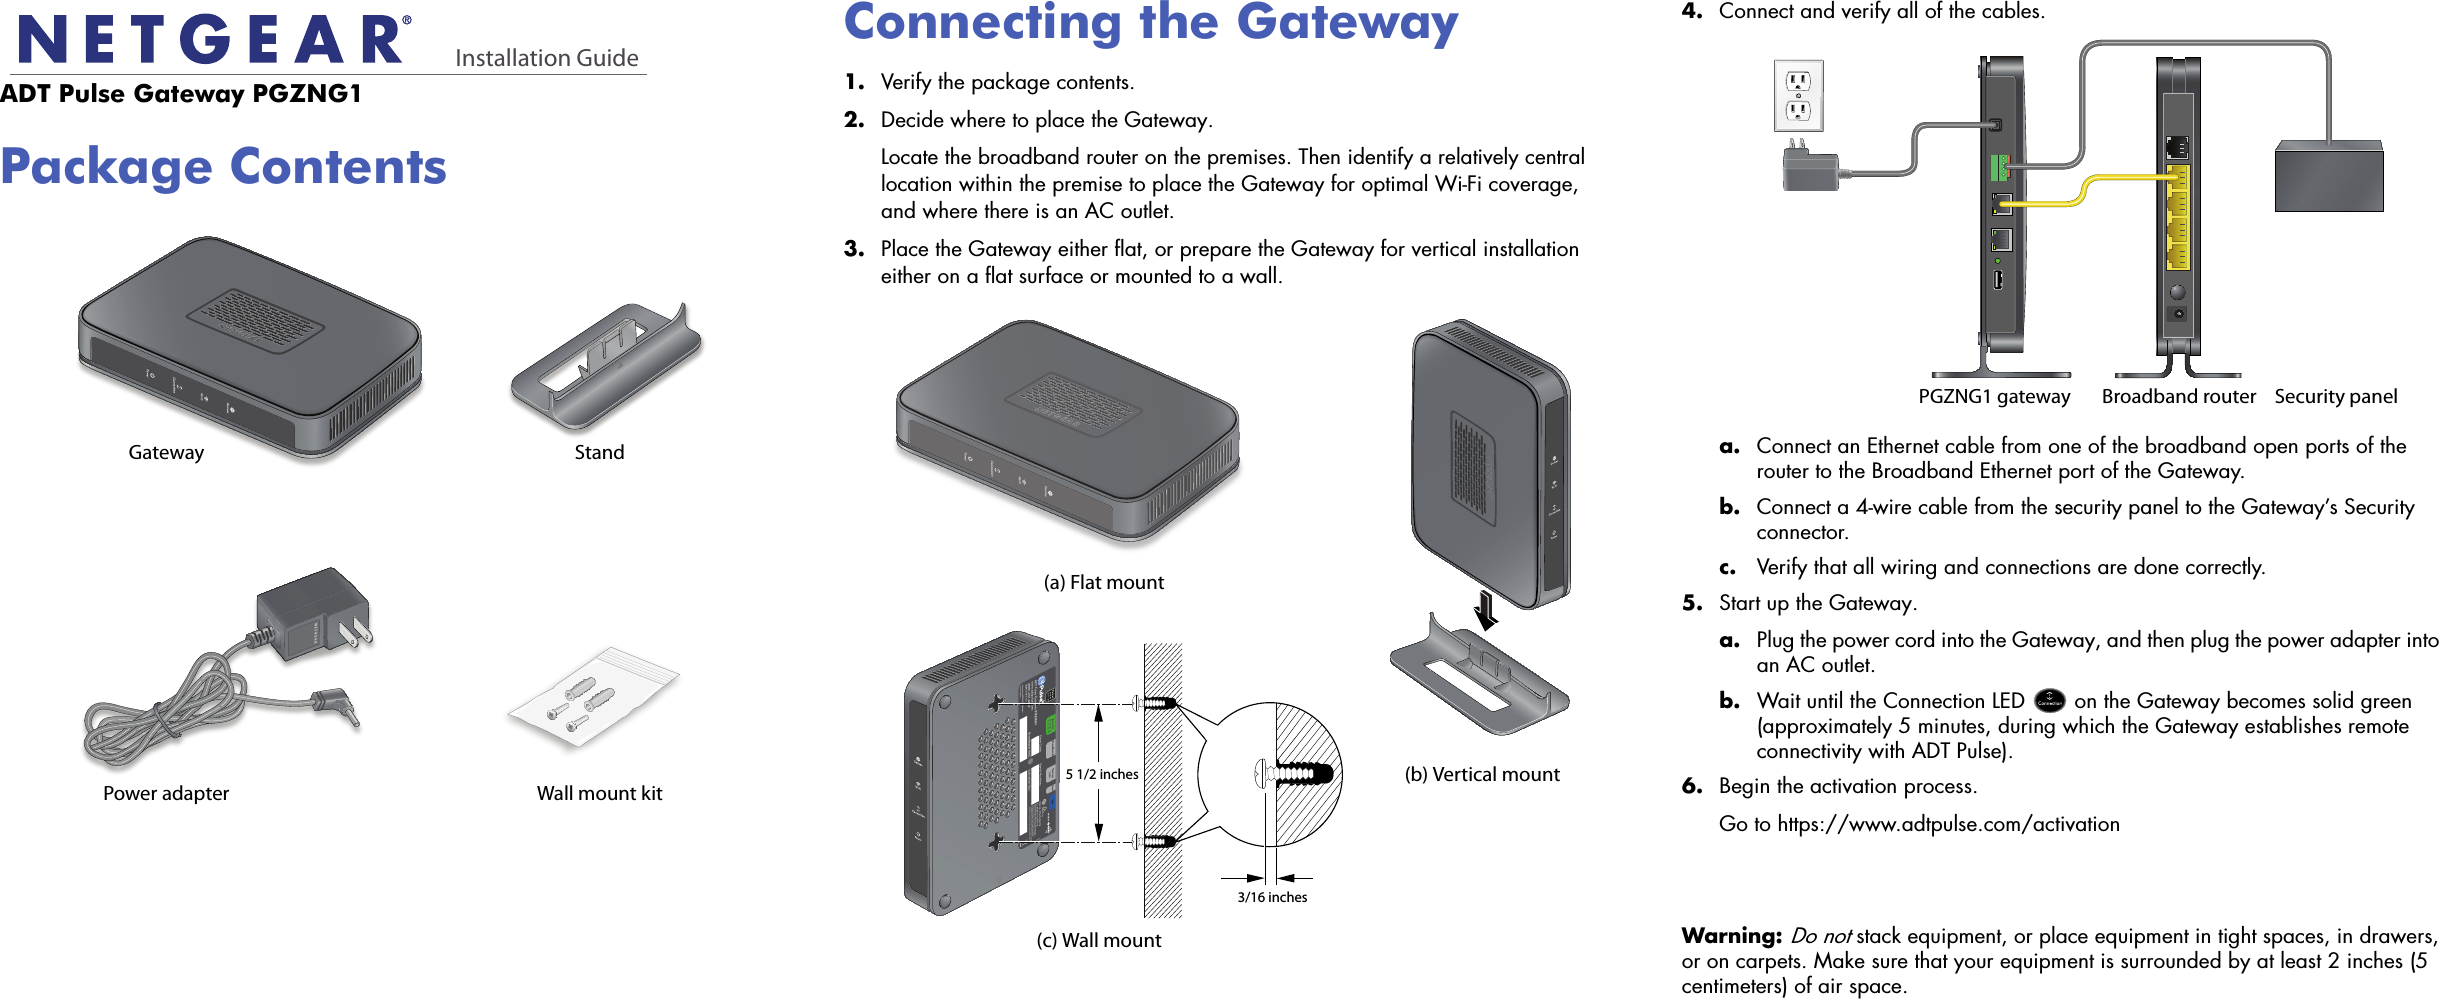 Installation GuideADT Pulse Gateway PGZNG1Package ContentsGatewayWall mount kitStandPower adapterConnecting the Gateway1.  Verify the package contents.2.  Decide where to place the Gateway.Locate the broadband router on the premises. Then identify a relatively central location within the premise to place the Gateway for optimal Wi-Fi coverage, and where there is an AC outlet.3.  Place the Gateway either flat, or prepare the Gateway for vertical installation either on a flat surface or mounted to a wall.4.  Connect and verify all of the cables.a. Connect an Ethernet cable from one of the broadband open ports of the router to the Broadband Ethernet port of the Gateway.b. Connect a 4-wire cable from the security panel to the Gateway’s Security connector.c. Verify that all wiring and connections are done correctly.5.  Start up the Gateway.a. Plug the power cord into the Gateway, and then plug the power adapter into an AC outlet.b. Wait until the Connection LED   on the Gateway becomes solid green (approximately 5 minutes, during which the Gateway establishes remote connectivity with ADT Pulse).6.  Begin the activation process.Go to https://www.adtpulse.com/activation Warning: Do not stack equipment, or place equipment in tight spaces, in drawers, or on carpets. Make sure that your equipment is surrounded by at least 2 inches (5 centimeters) of air space. (a) Flat mount(c) Wall mount(b) Vertical mount5 1/2 inches3/16 inchesBroadband routerPGZNG1 gateway Security panel